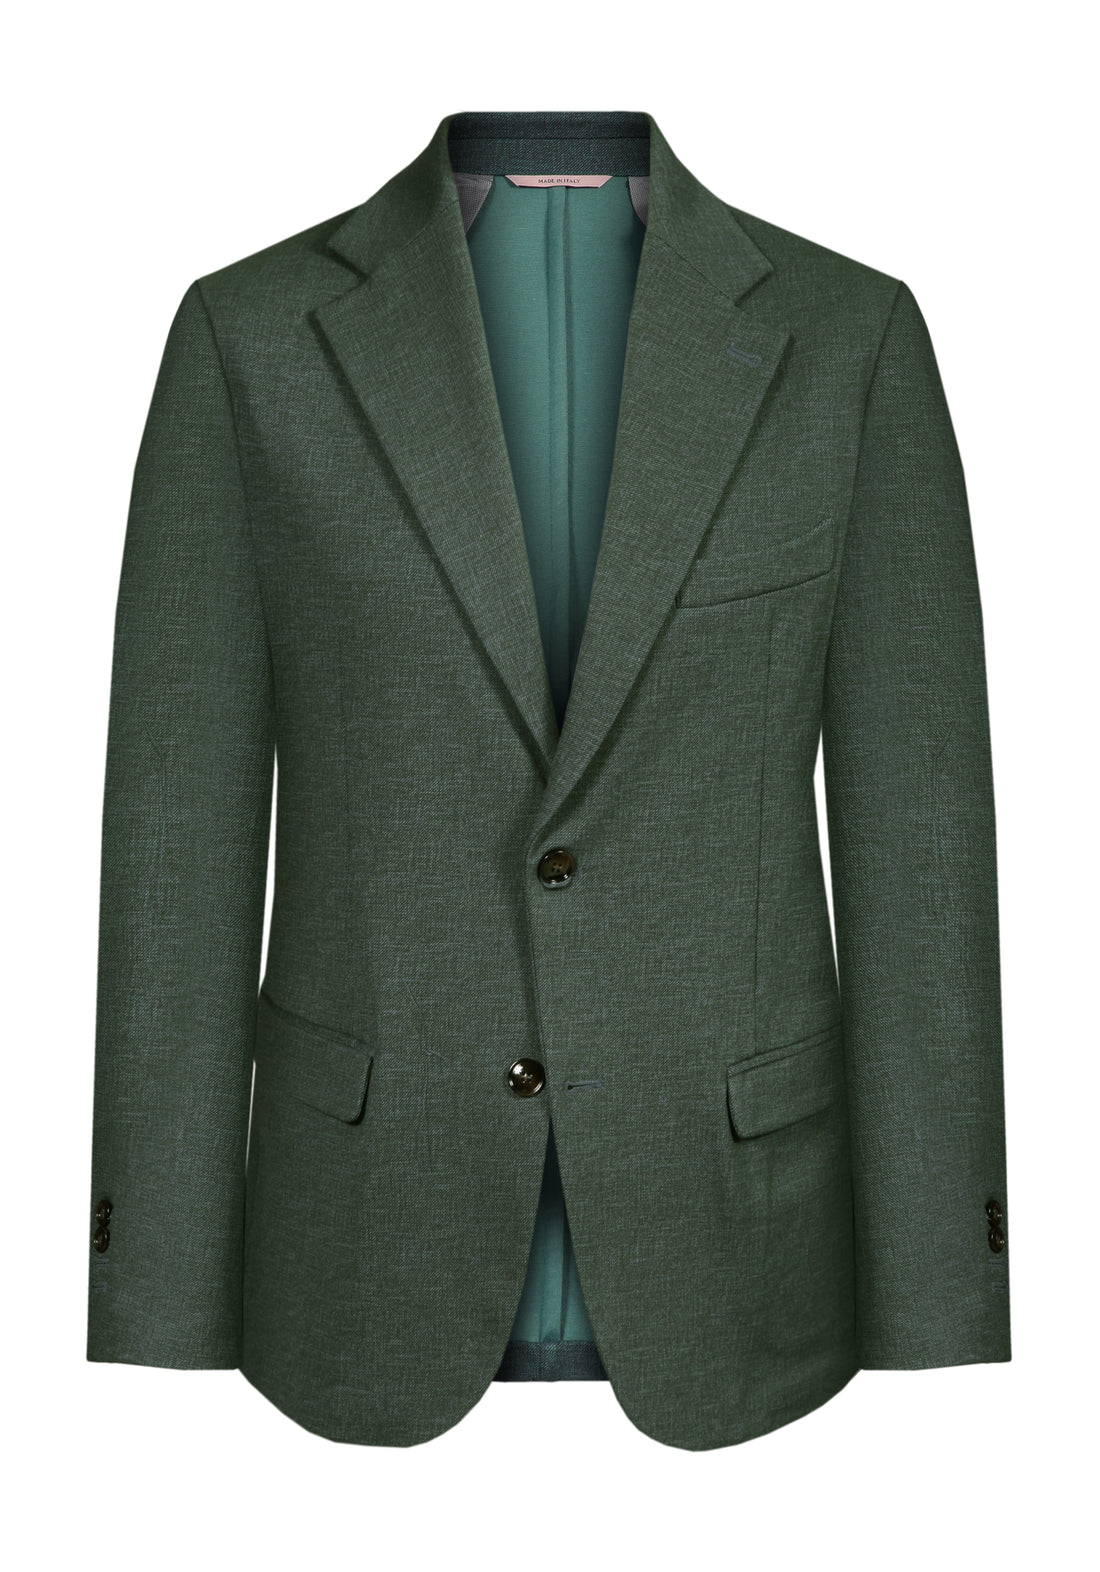 Two-button jacket in elastic fabric - Green